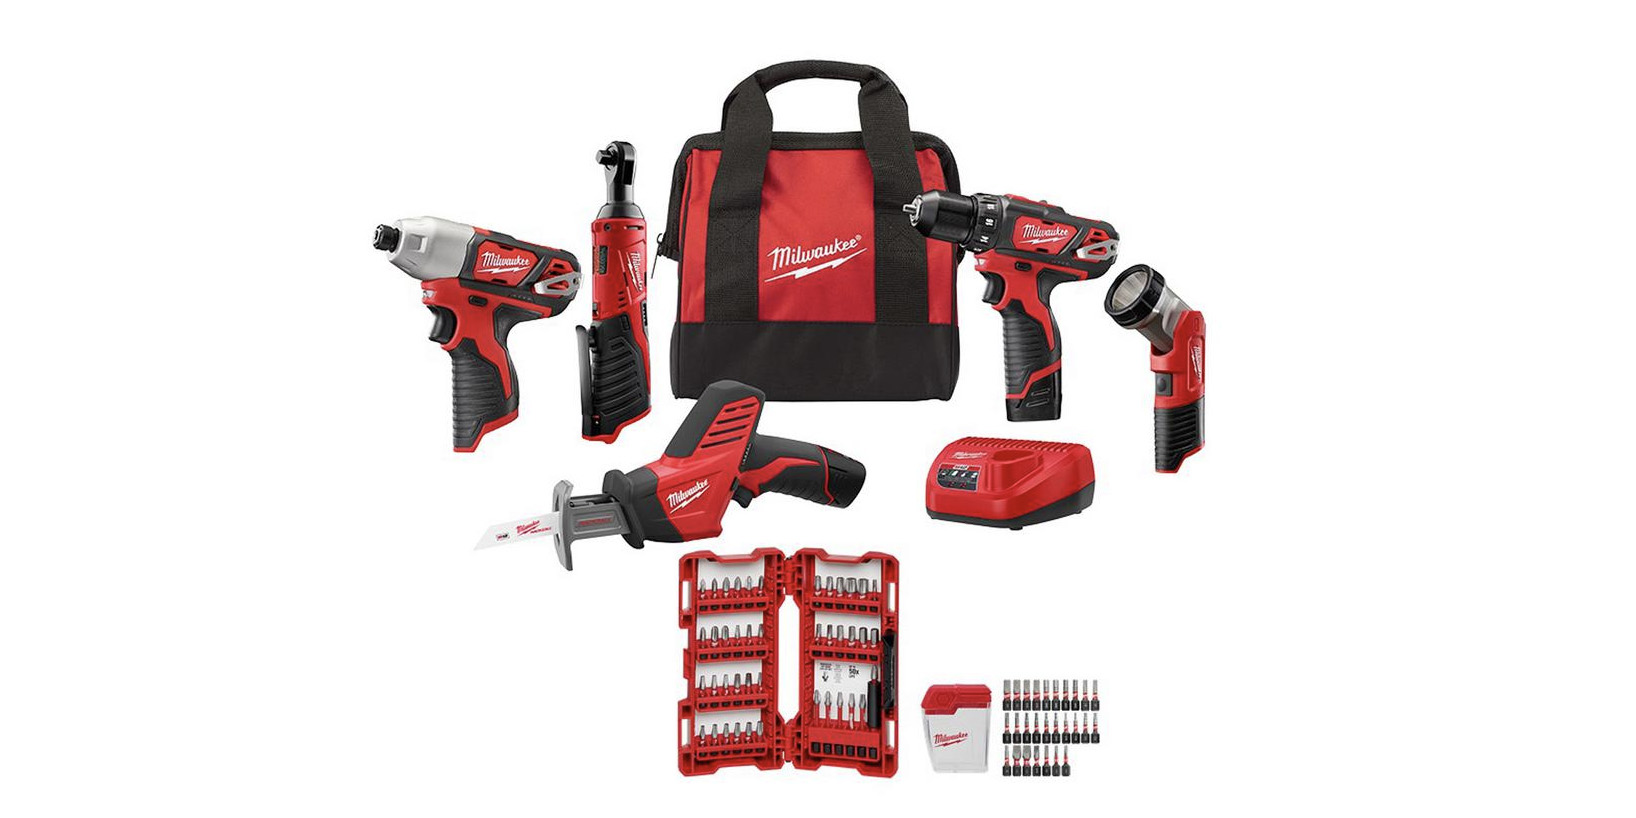 home-depot-drops-milwaukee-tool-prices-by-as-much-as-40-today-only